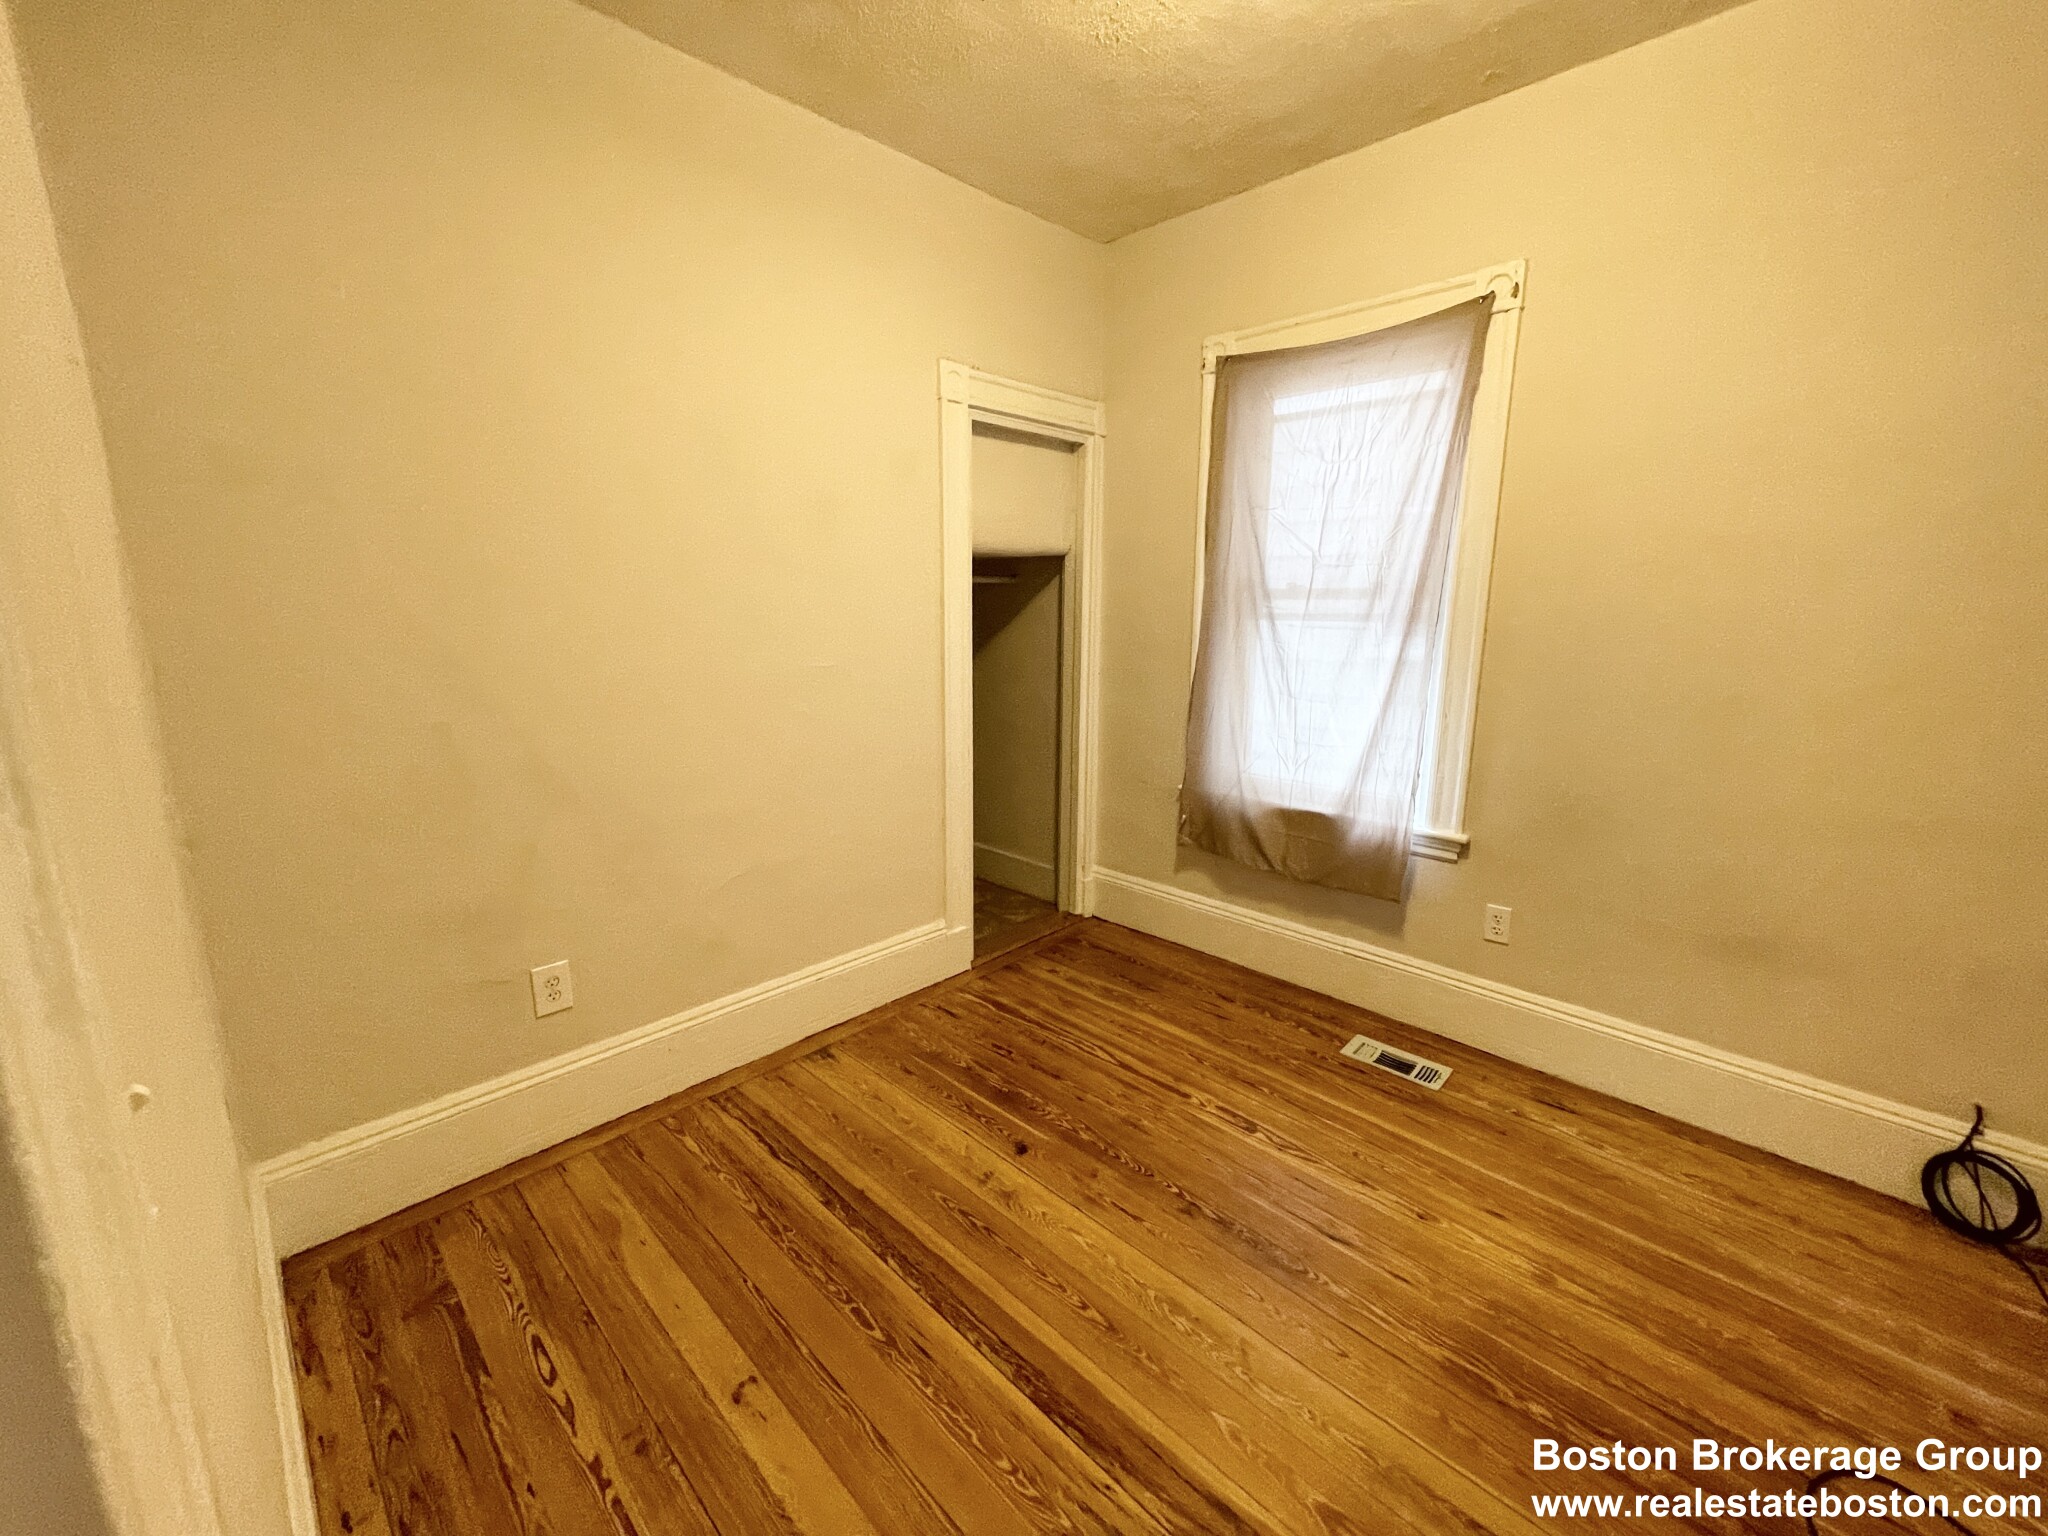 Photos of apartment on Wave Ave.,Boston MA 02125